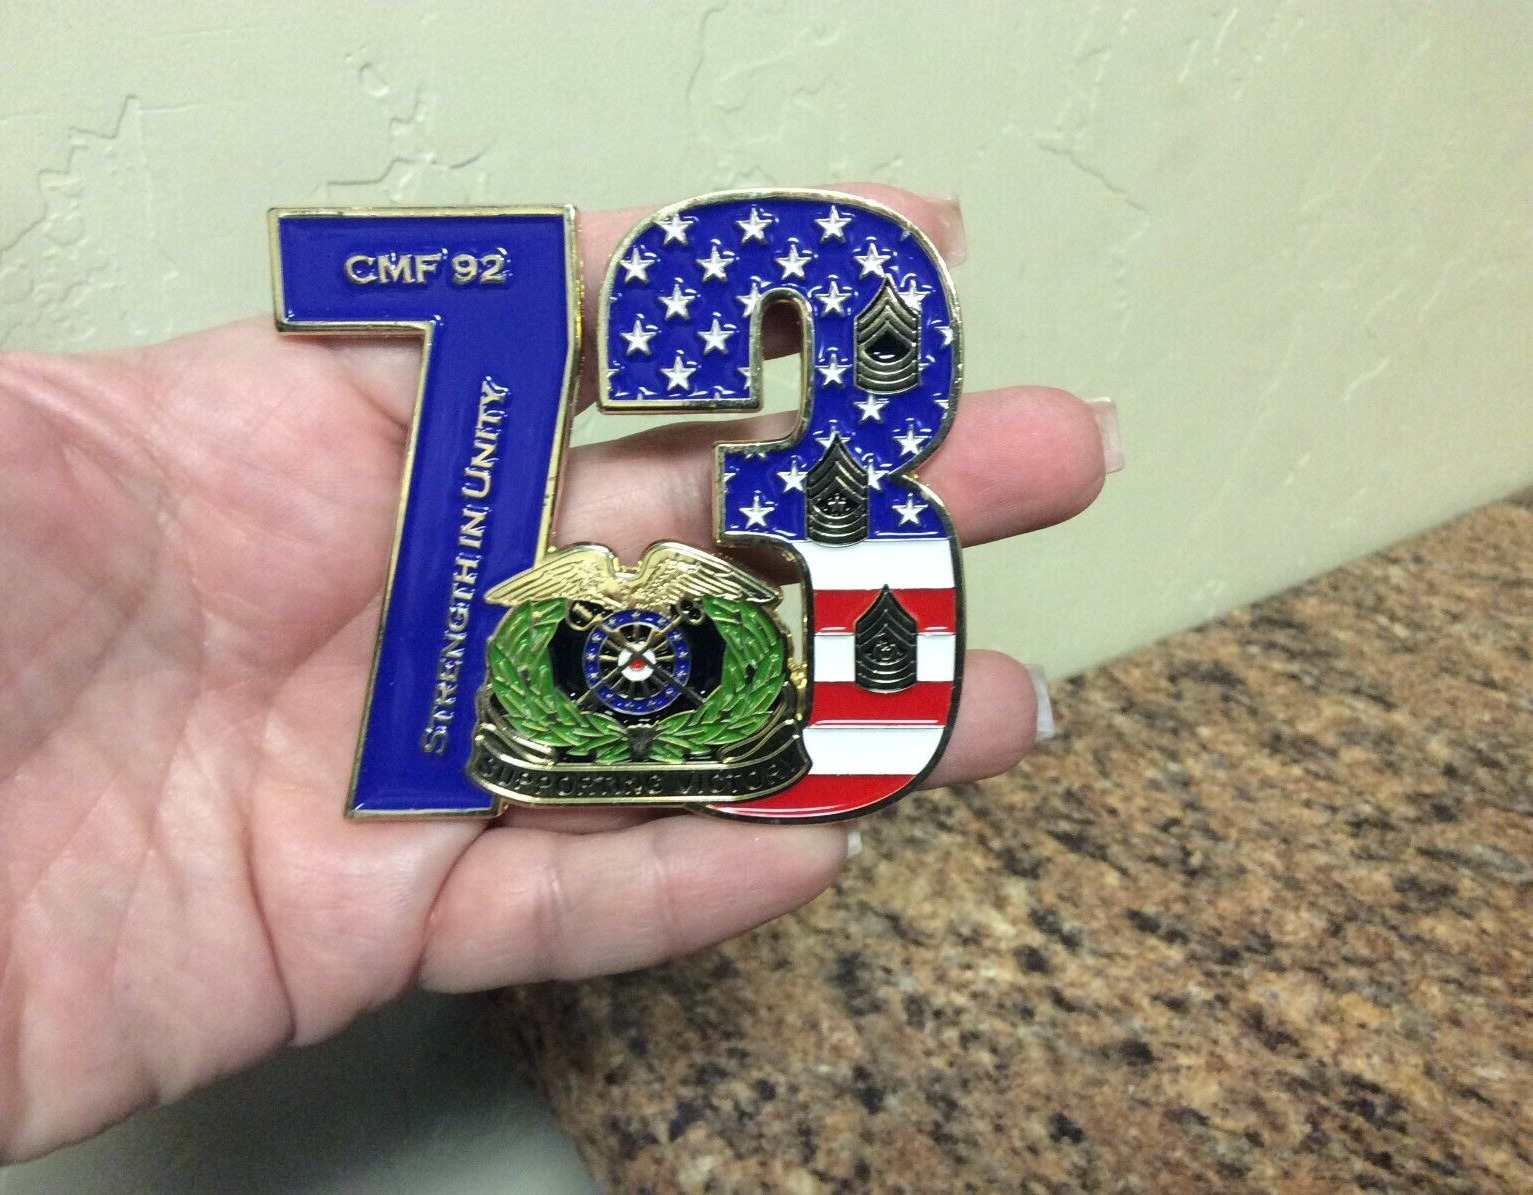 US ARMY CMF 92 CLASS 73 (2022-2023) Challenge Coin